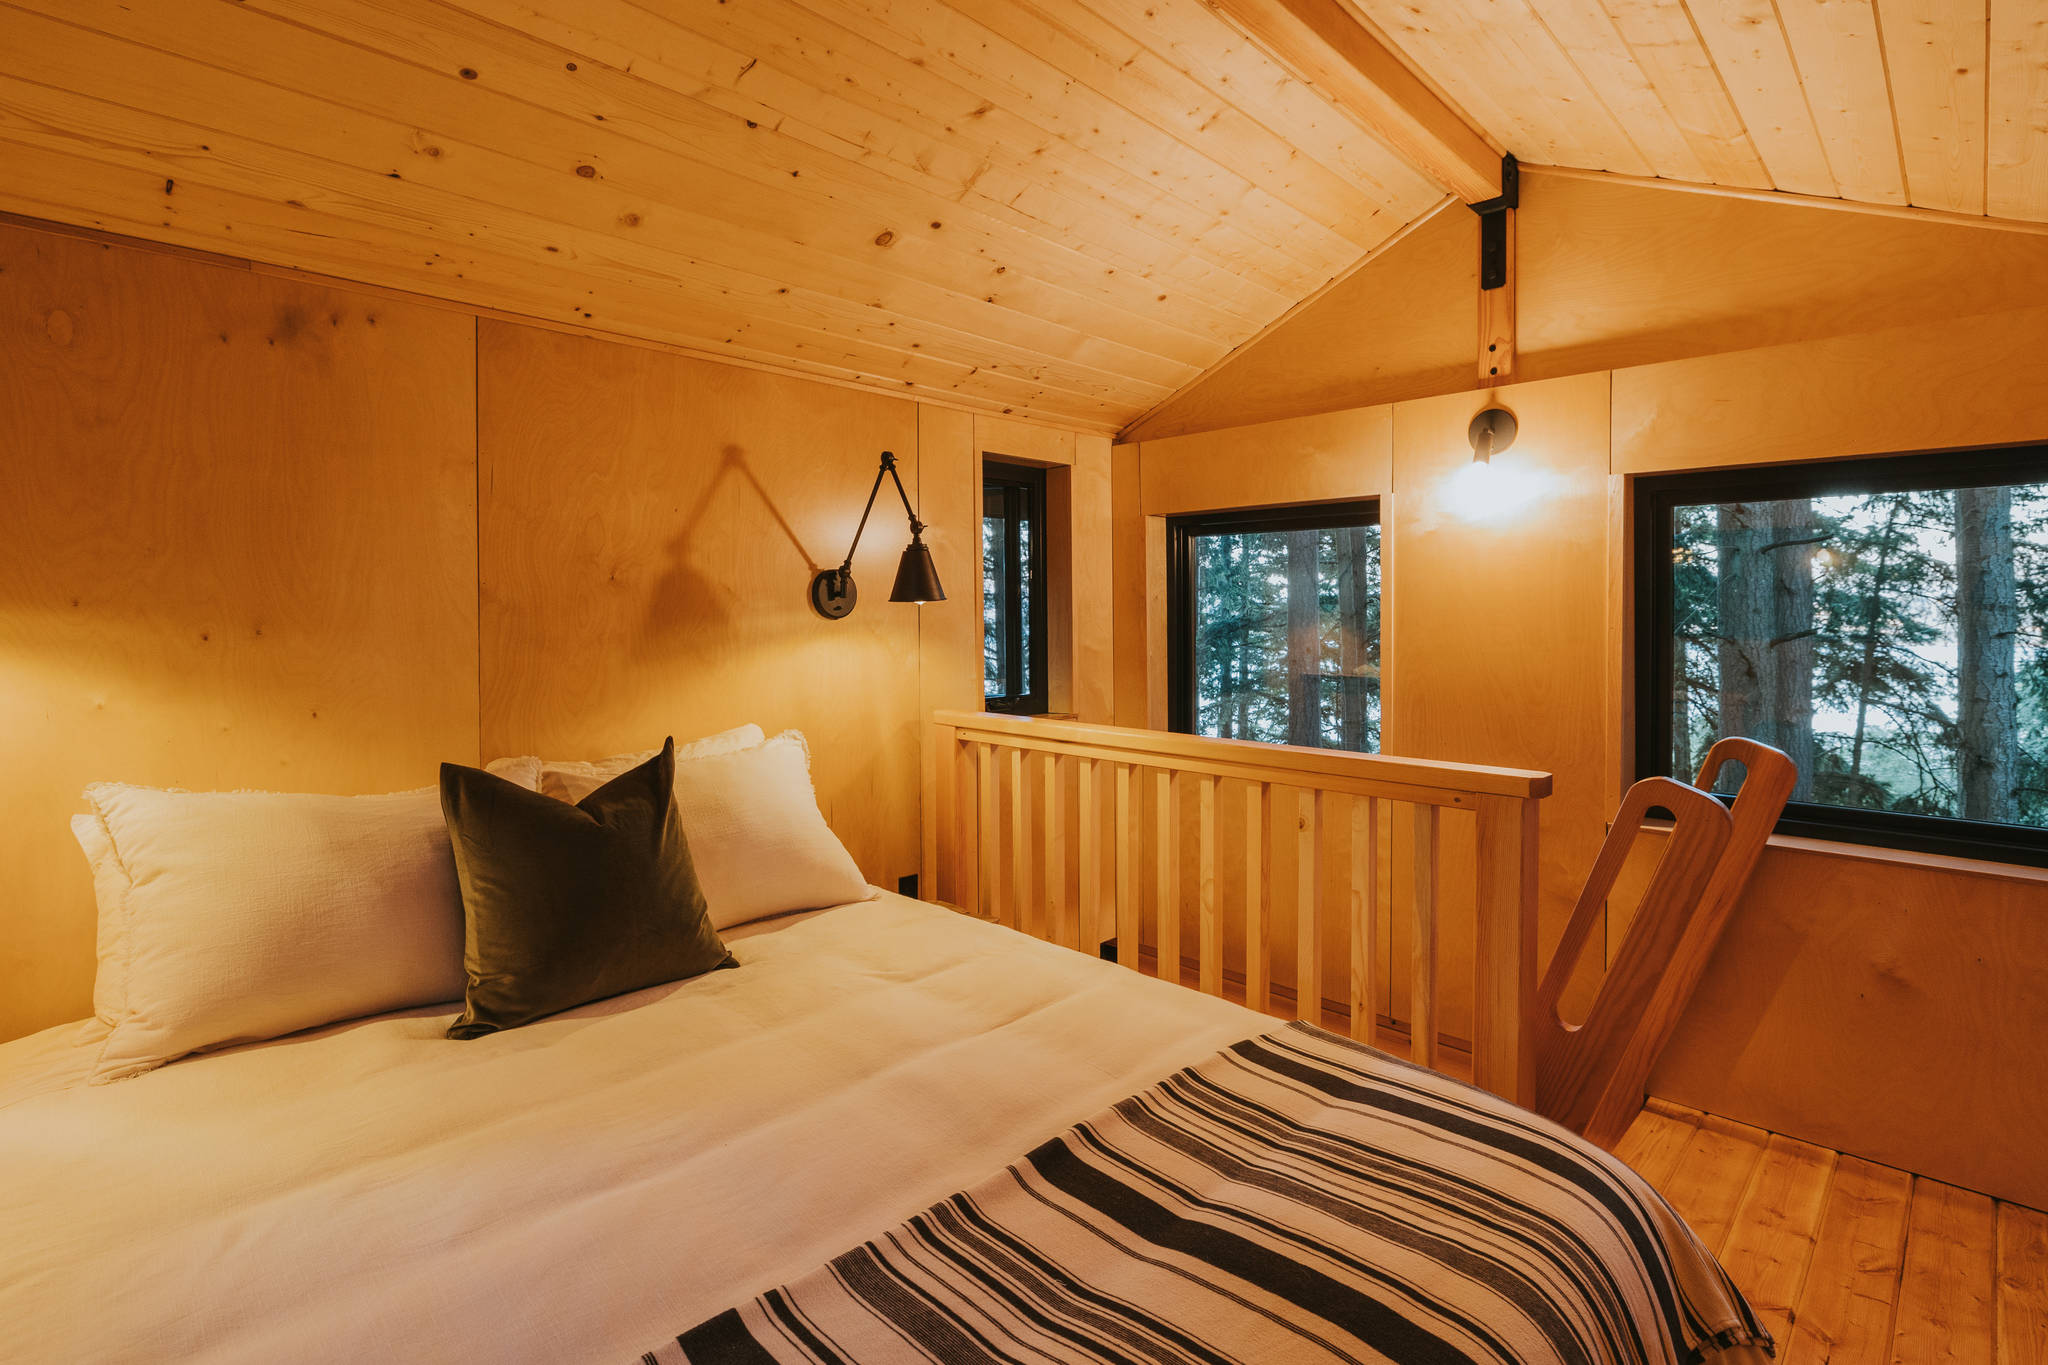 Guests will feel at home in the cozy but modern treehouse, which does have indoor plumbing. (Photo by Bryton Wilson)